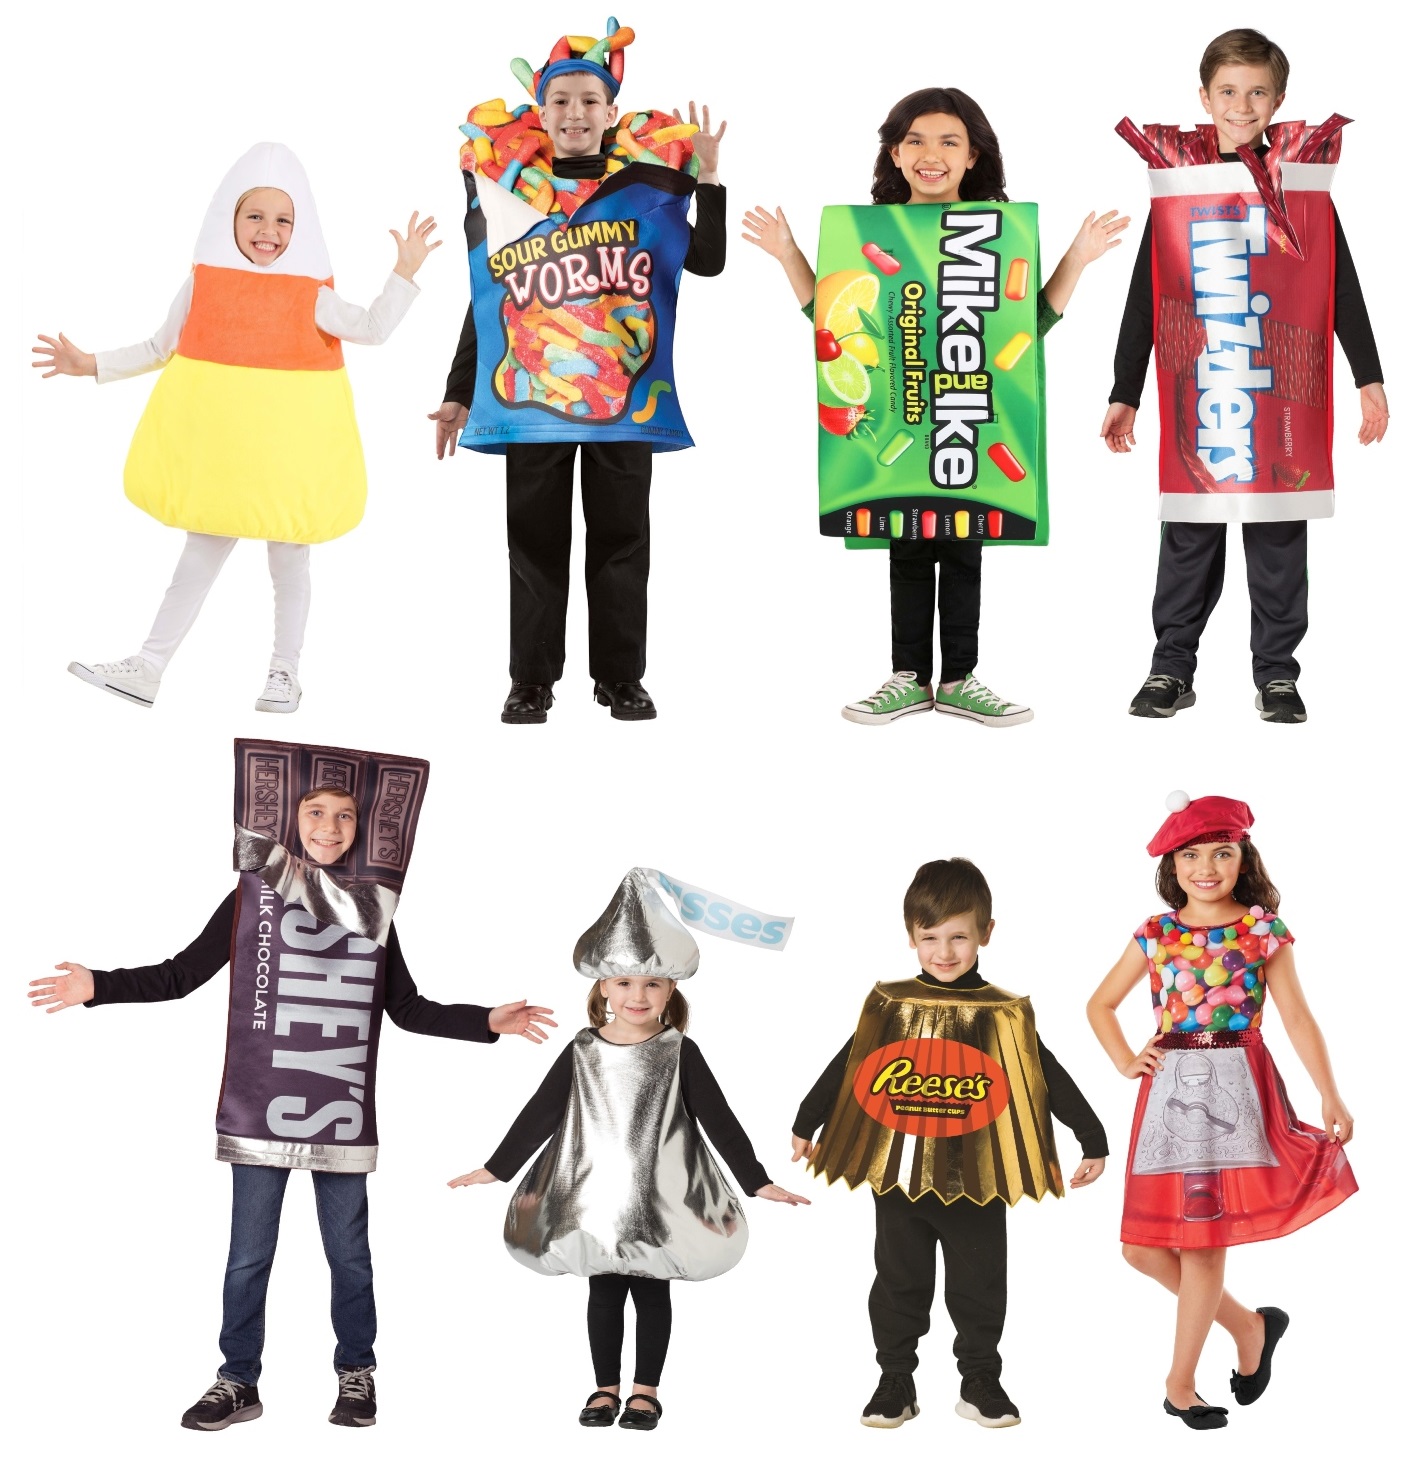 Candy Costume Ideas, Cupcake Costume Ideas and Costumes for Sweet Tooths -   Blog